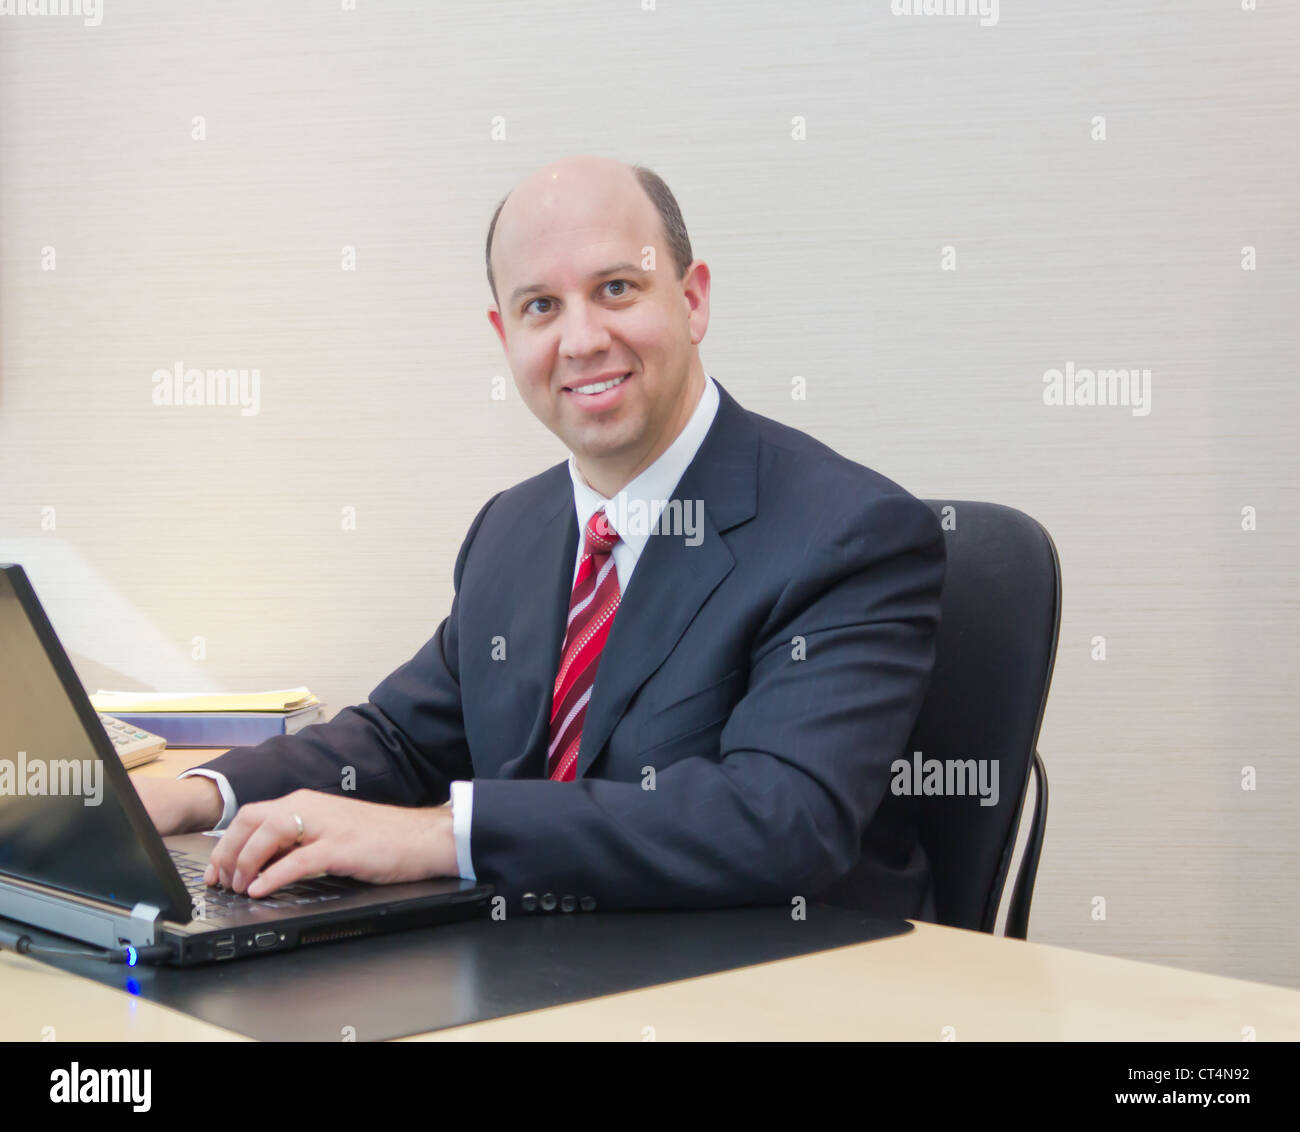 Smiling business man working on a laptop Banque D'Images